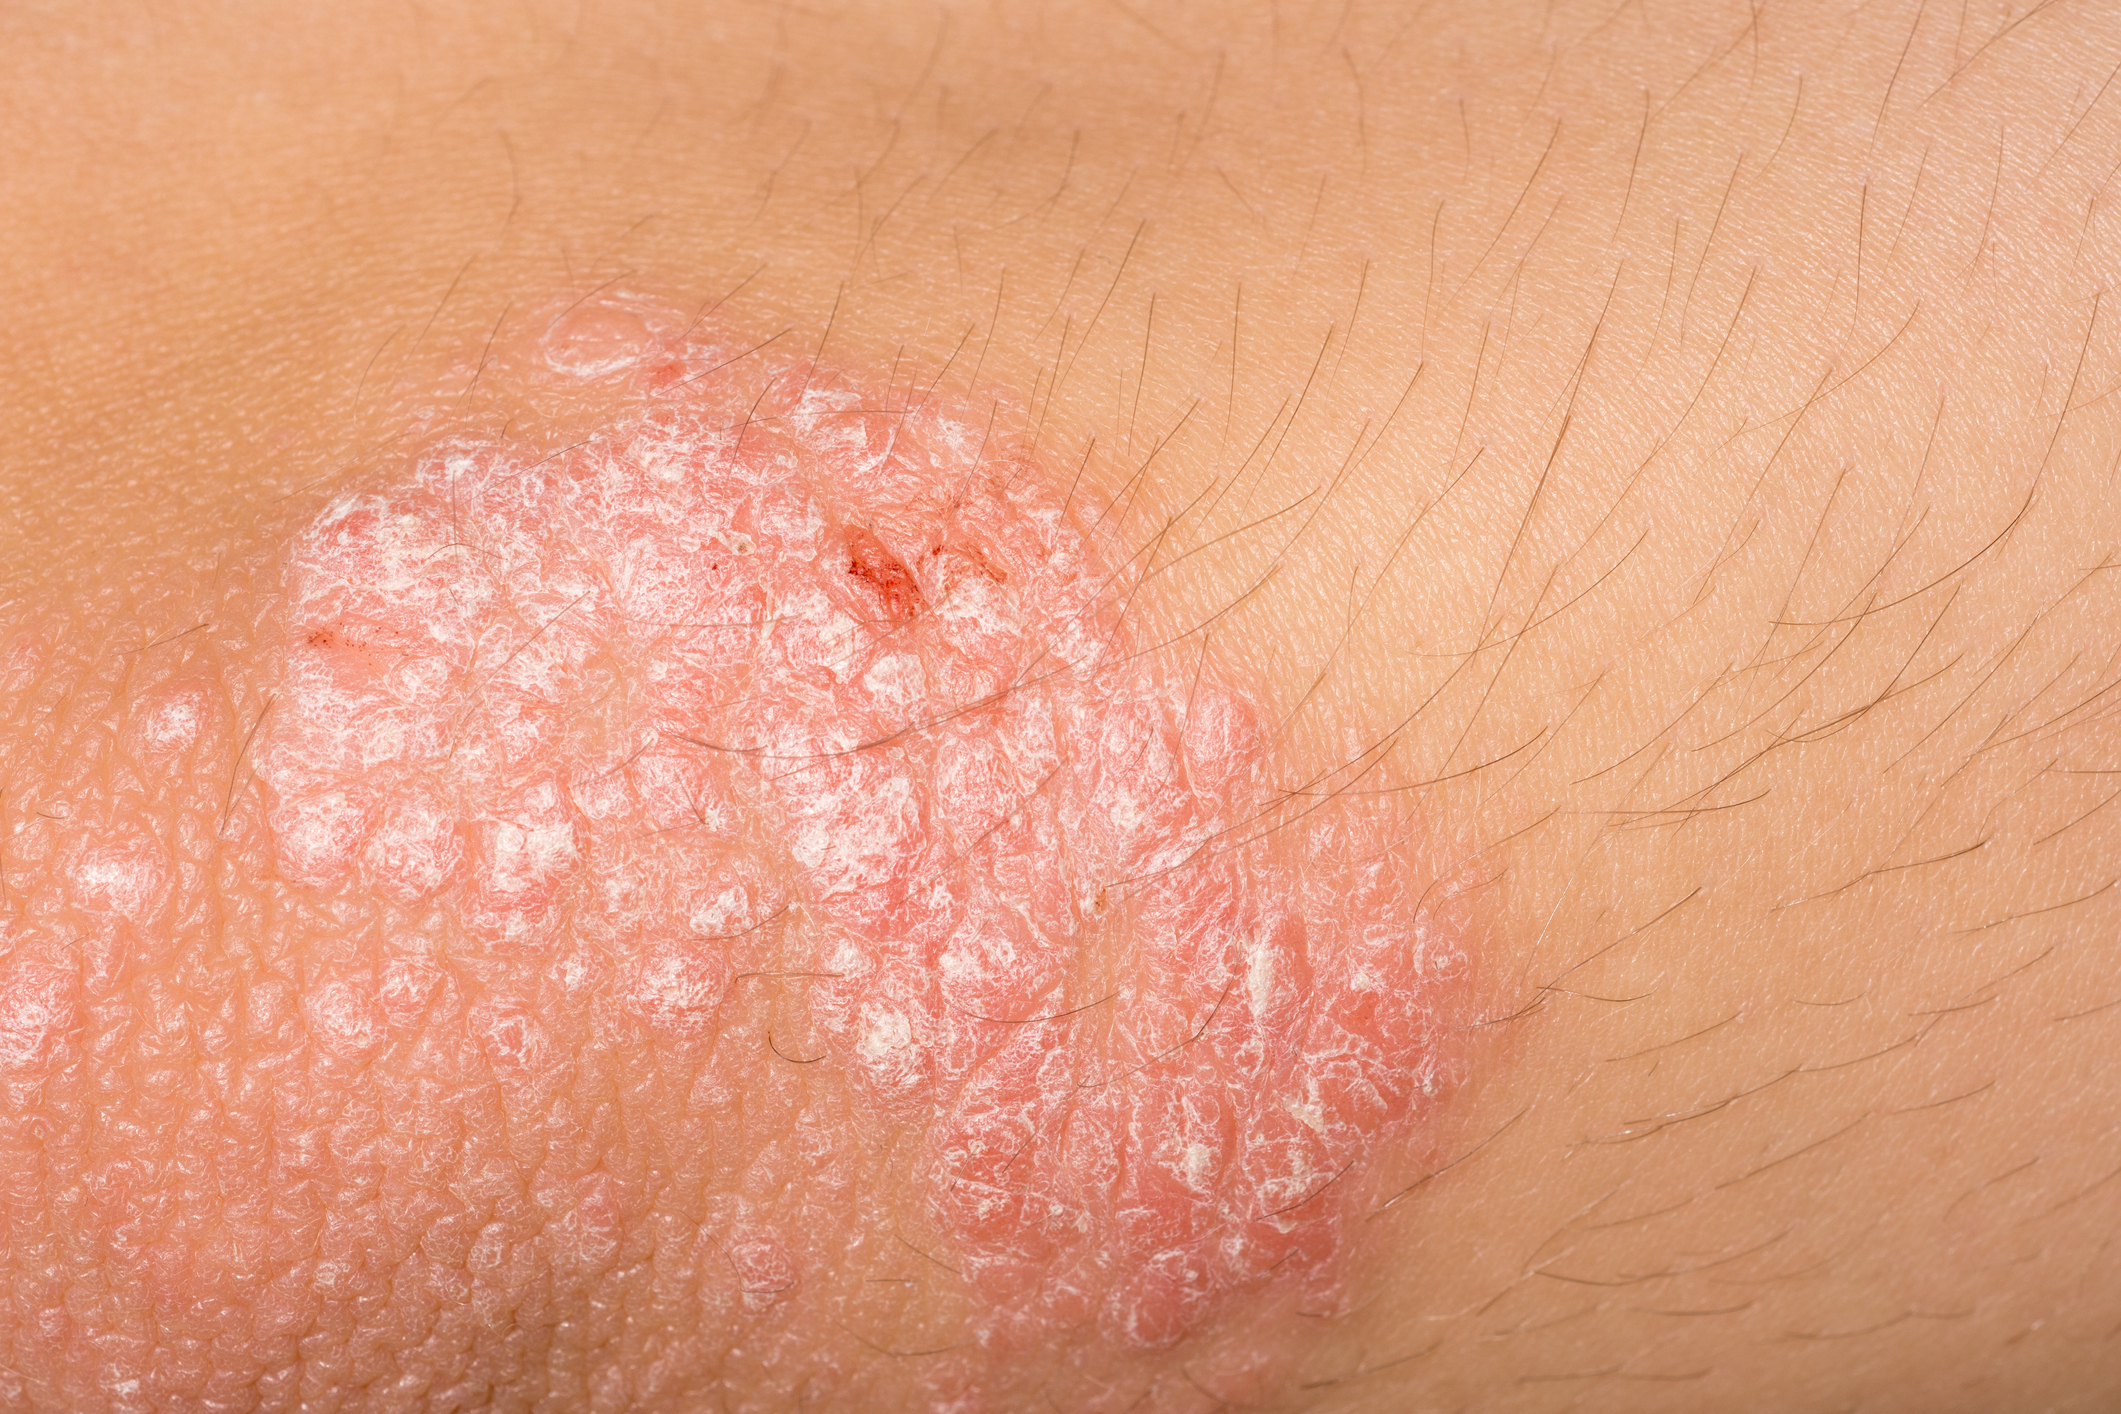 What is the best cream to treat psoriasis in india